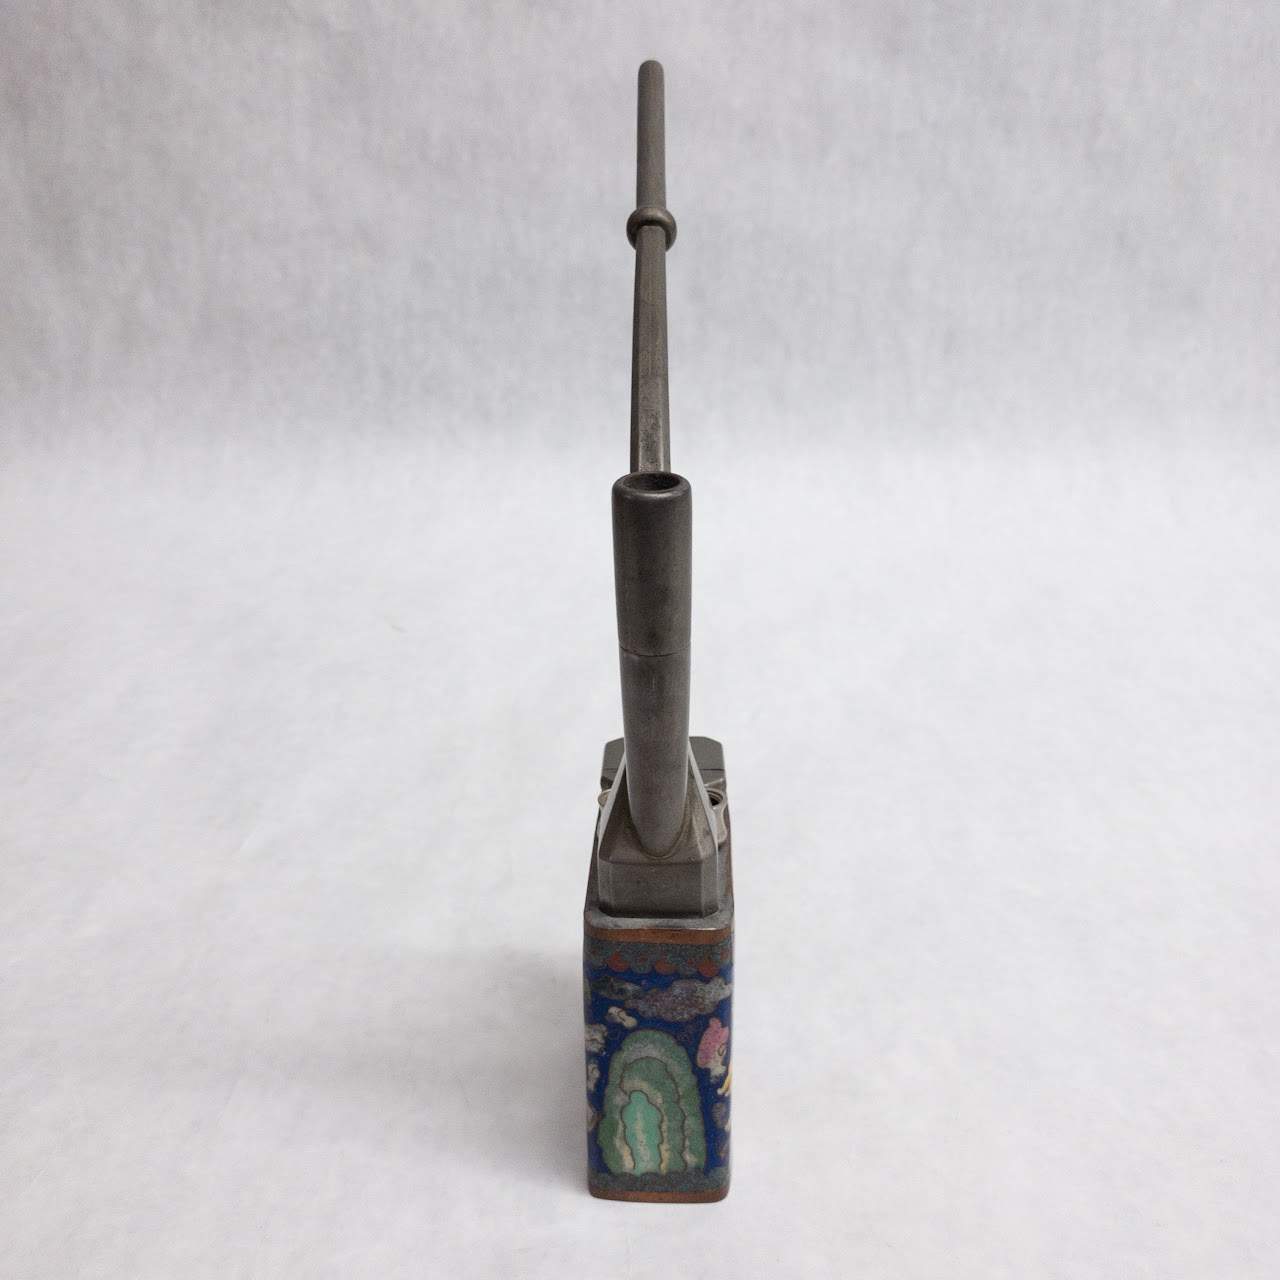 Chinese Antique Alloy Water Pipe with Cloisonné Enamel Overlay